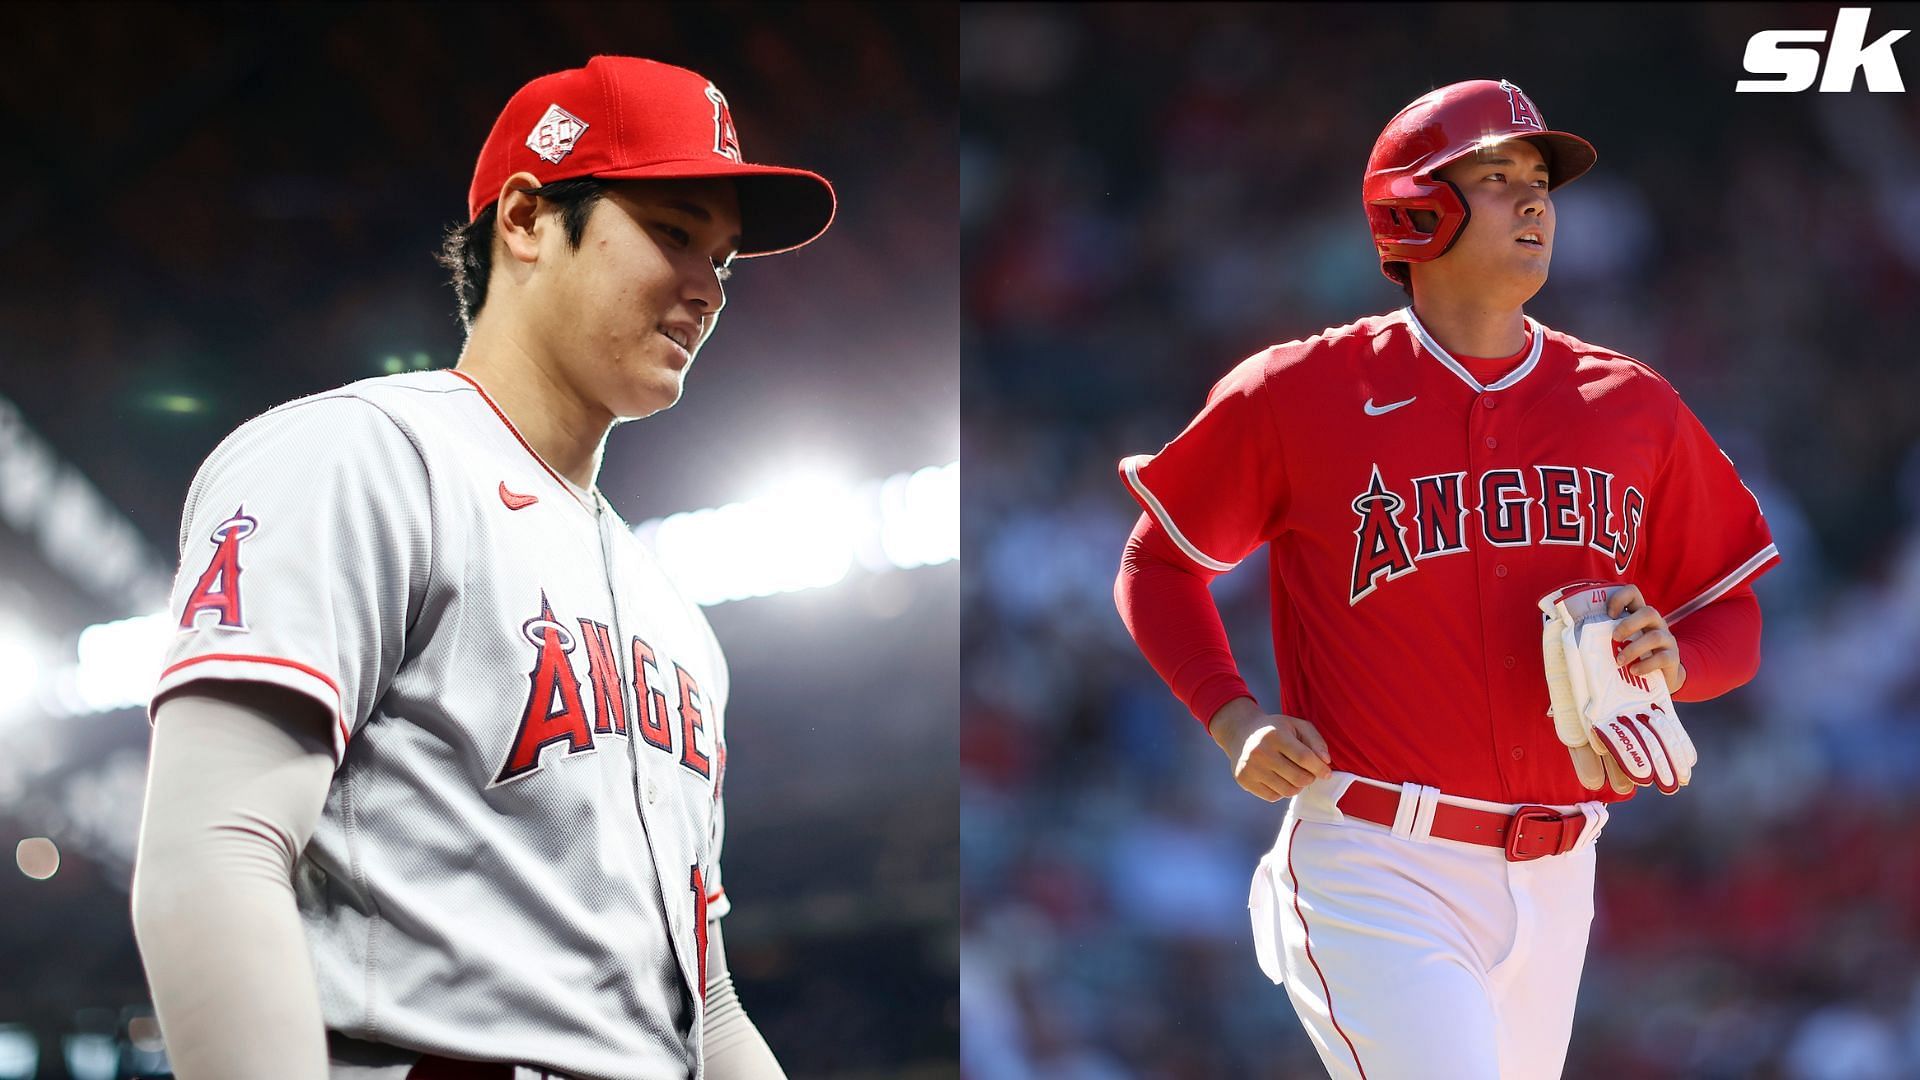 Shoh-no: What does Shohei Ohtani's injury mean for the future of